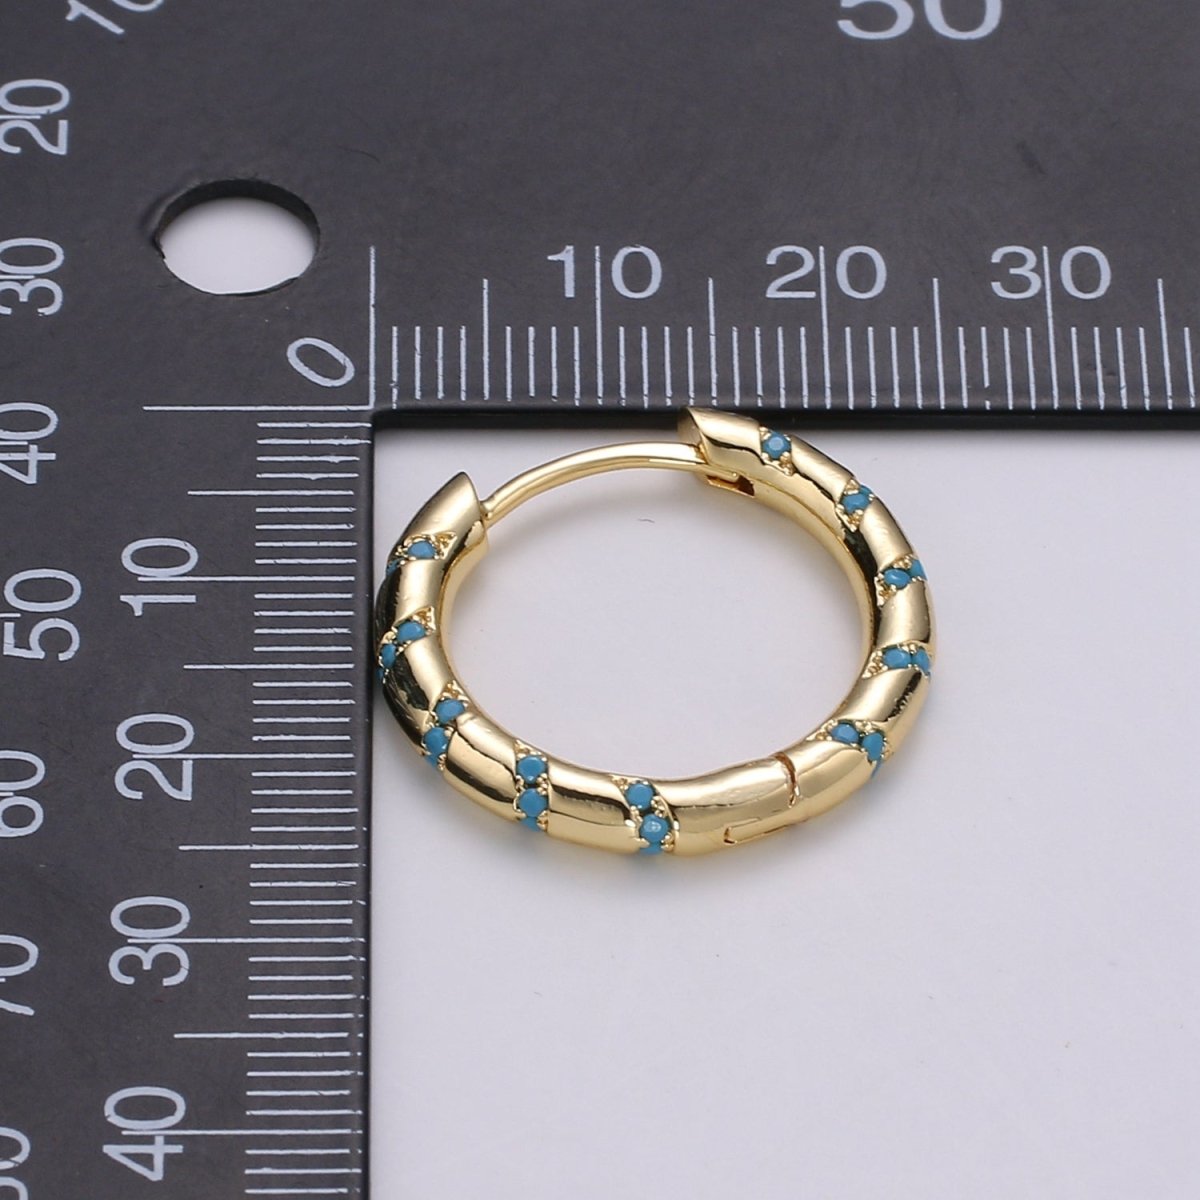 Hoops - Pink, Teal, Blue, Green, Clear, Multi-color Zirconia or White Gold CZ earrings - 24K Gold Huggie hoops Q-355 - Q-361 - DLUXCA